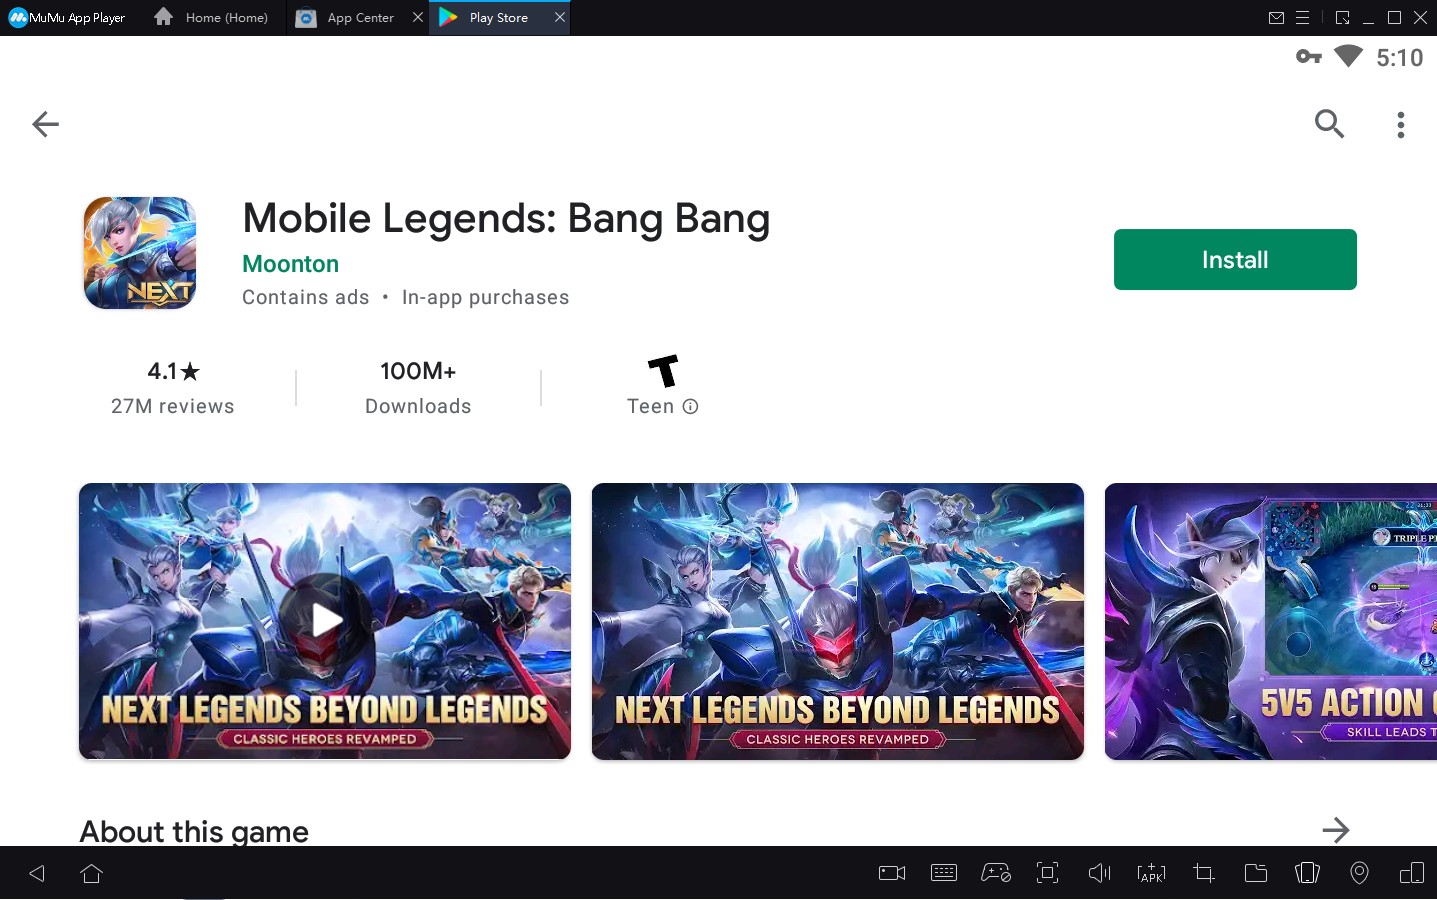 Play Mobile Legends: Bang Bang on PC at 120 FPS with Android 11